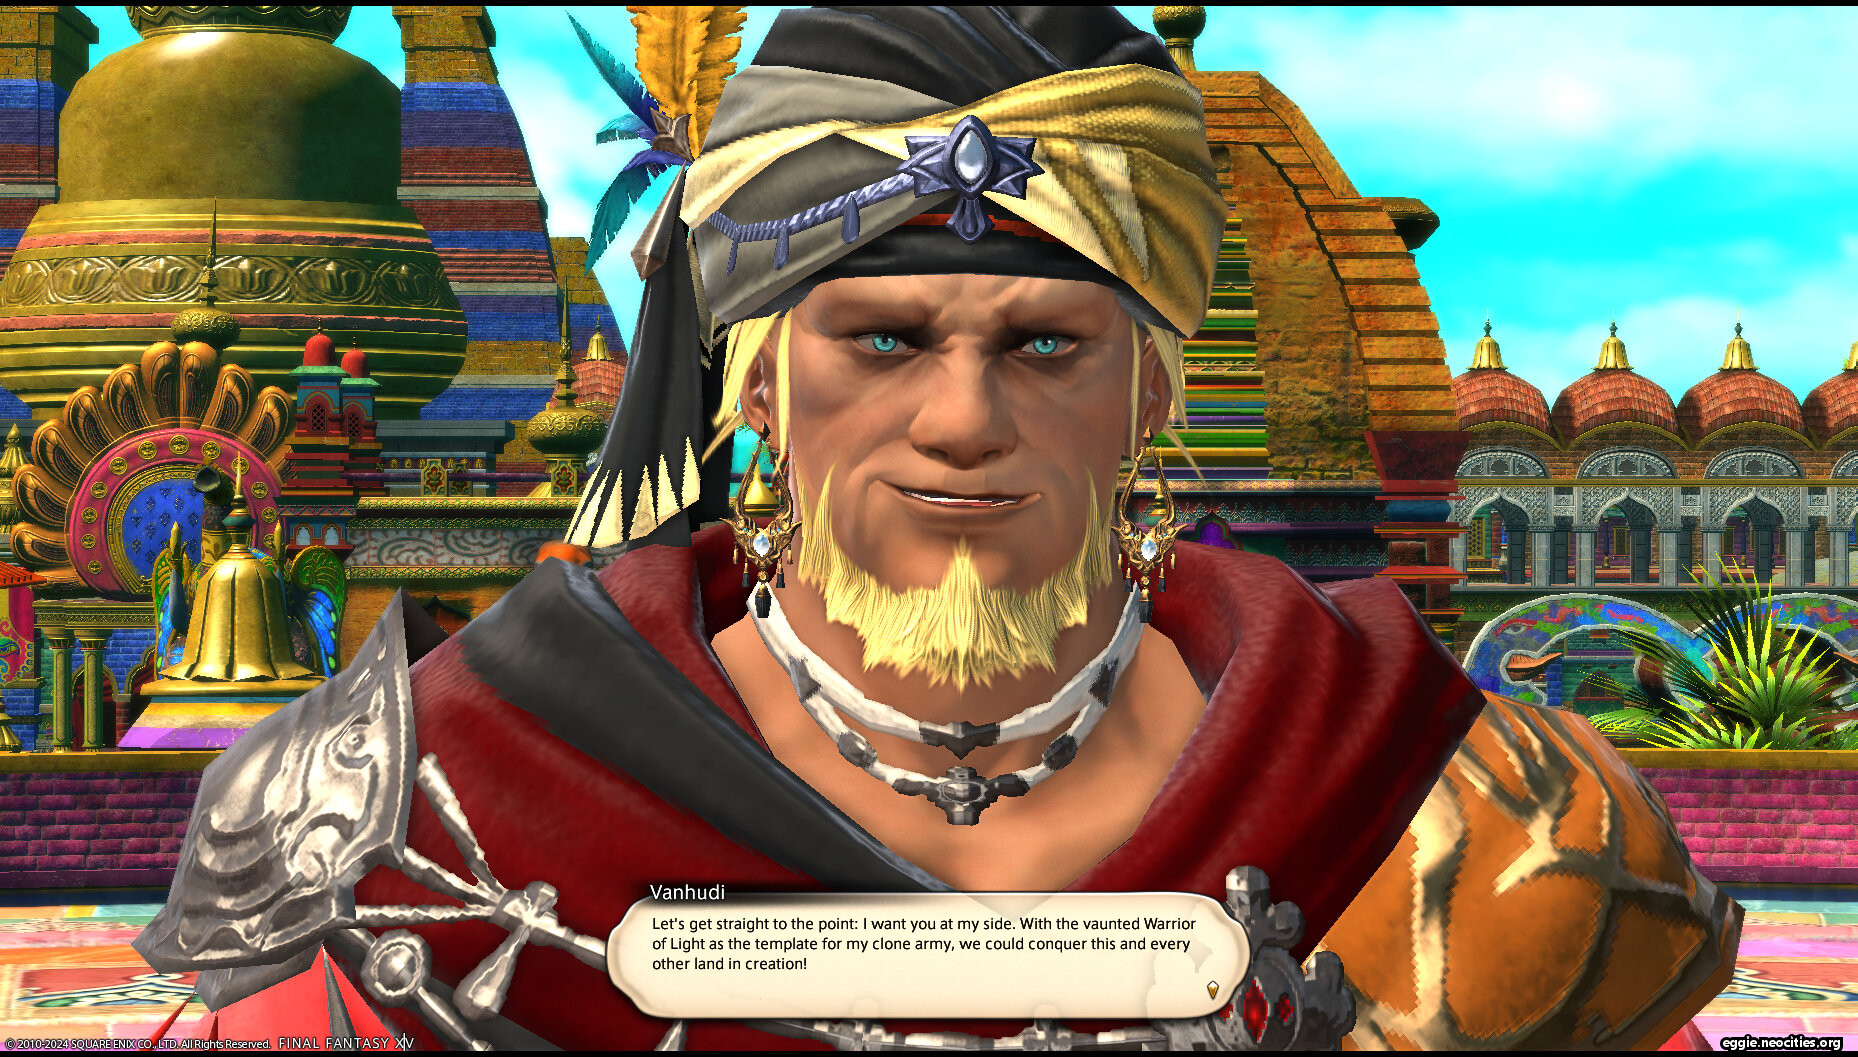 A screenshot of Vanhudi from the Hildibrand quests. His dialogue reads: Let's get straight to the point: I want you at my side. With the vaunted Warrior of Light as the template for my clone army, we could conquer this and every other land in creation!